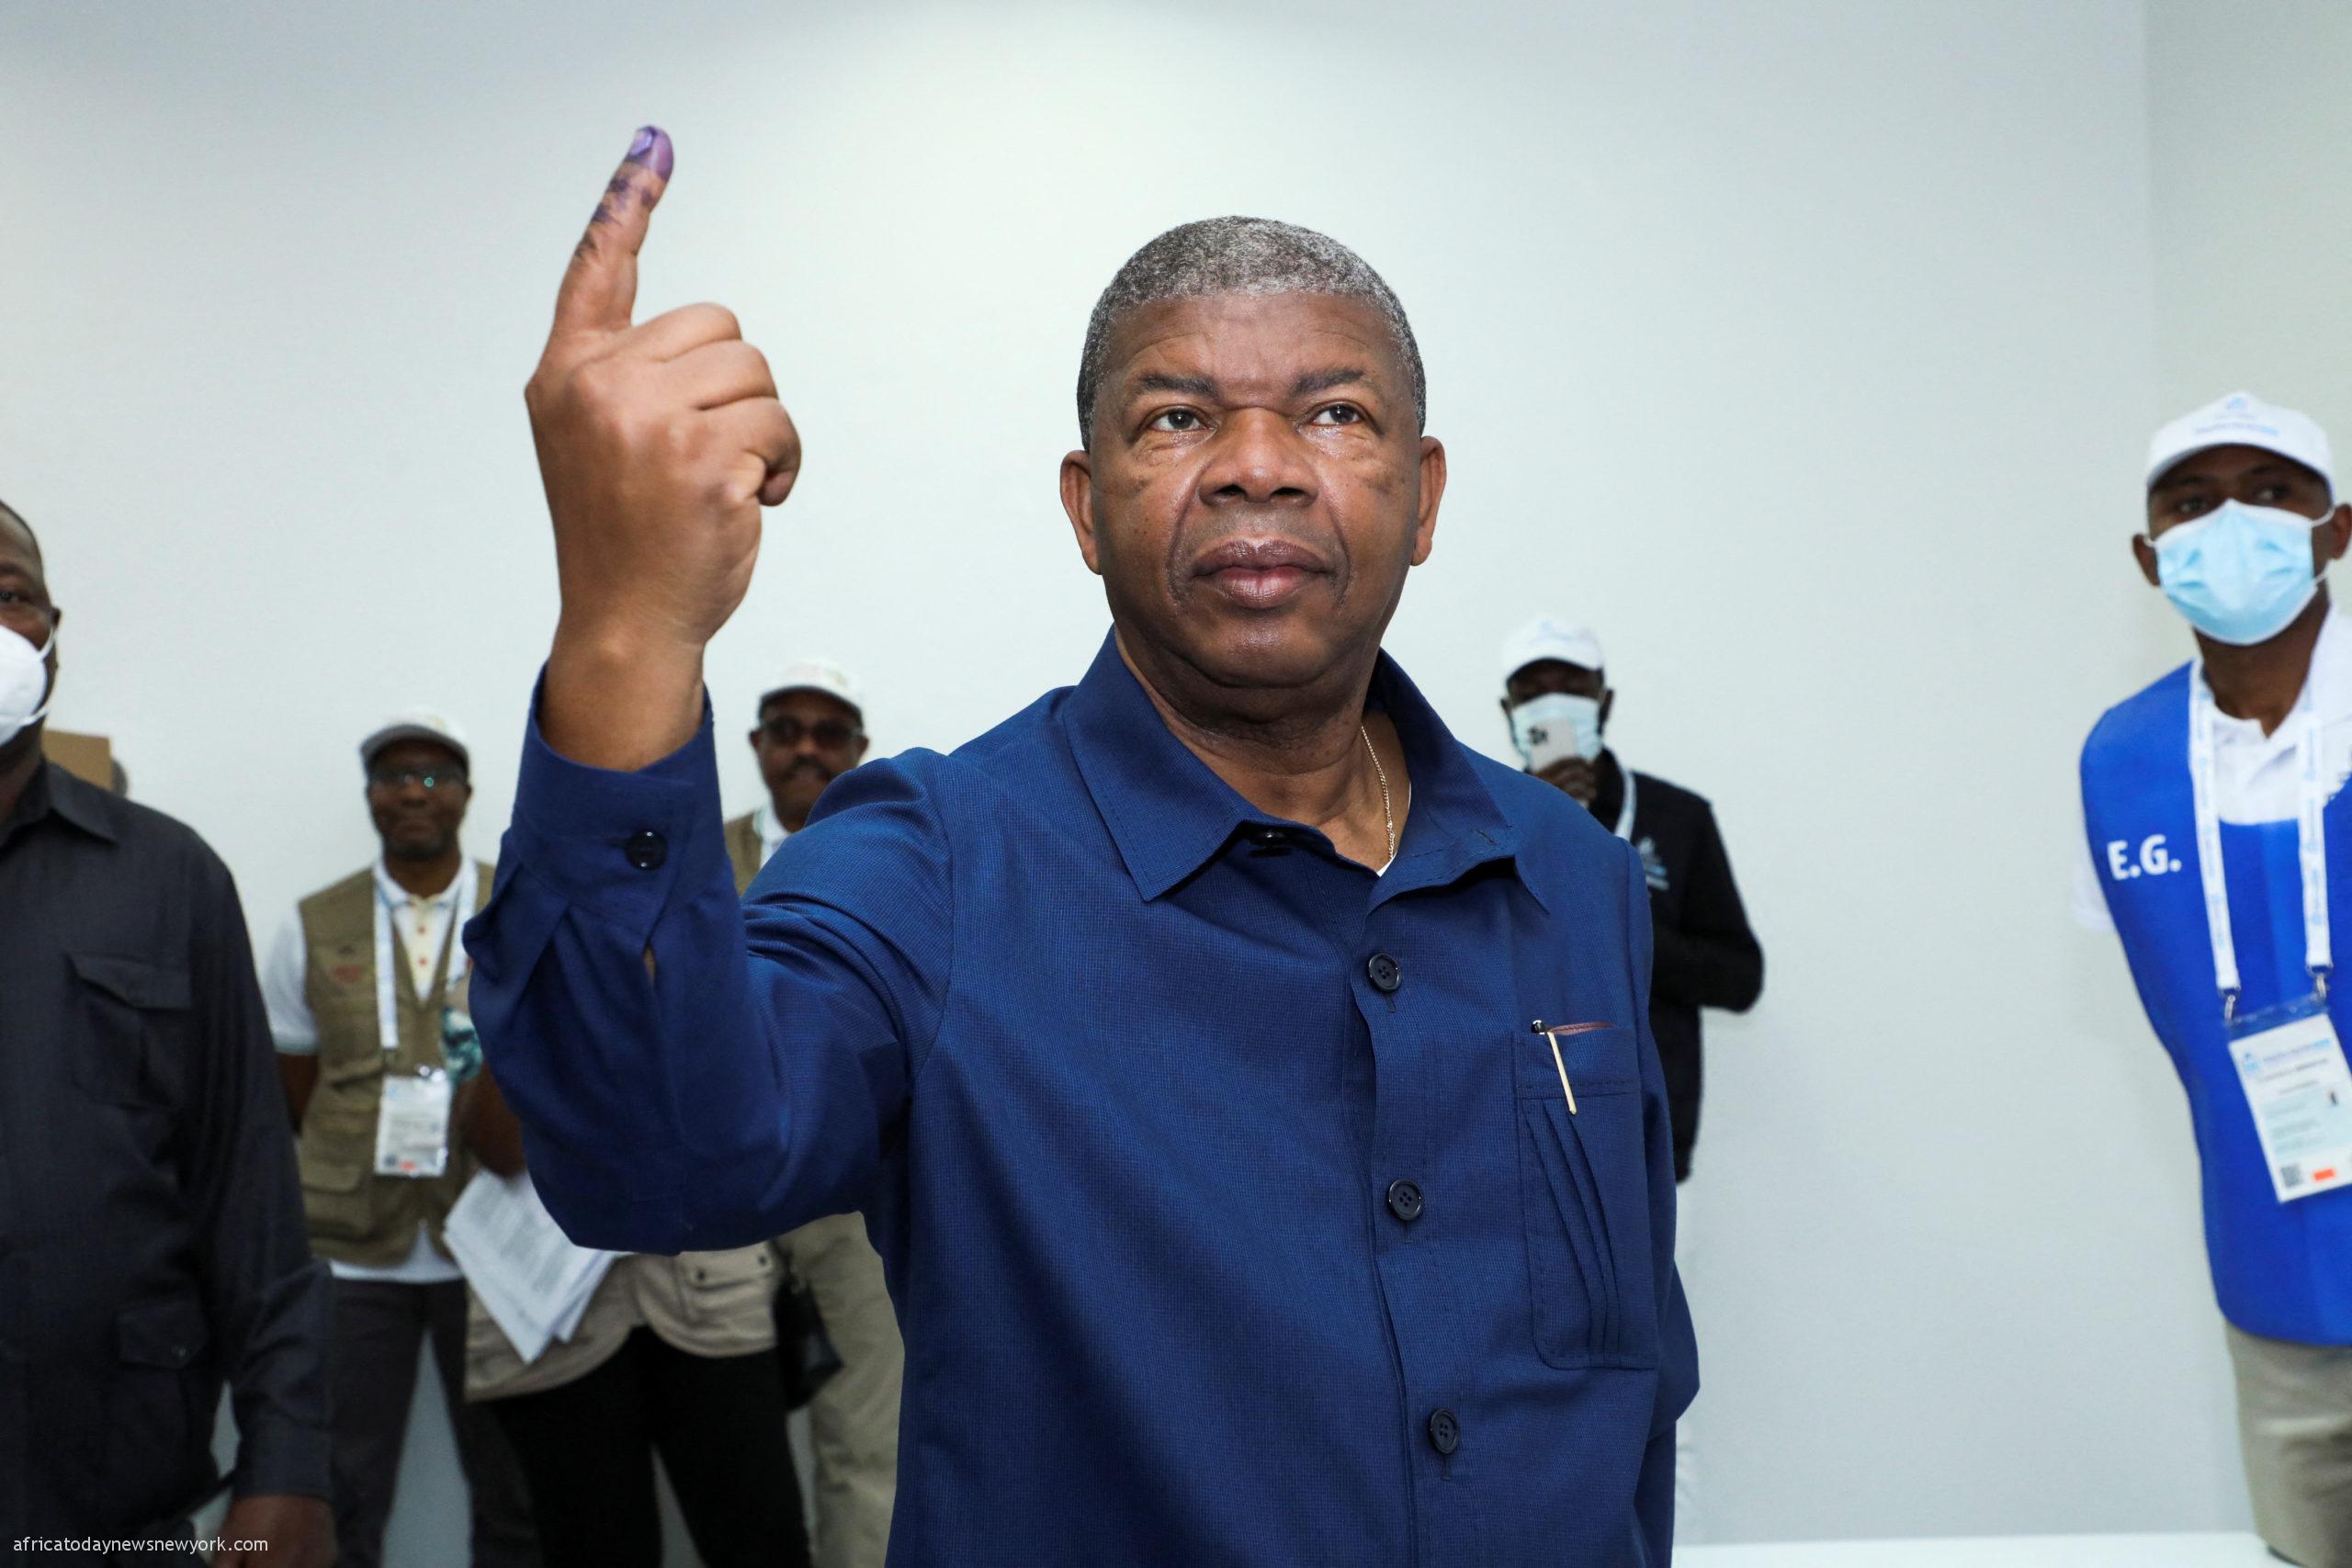 Ruling Party In Angola Wins President Polls For Second Term